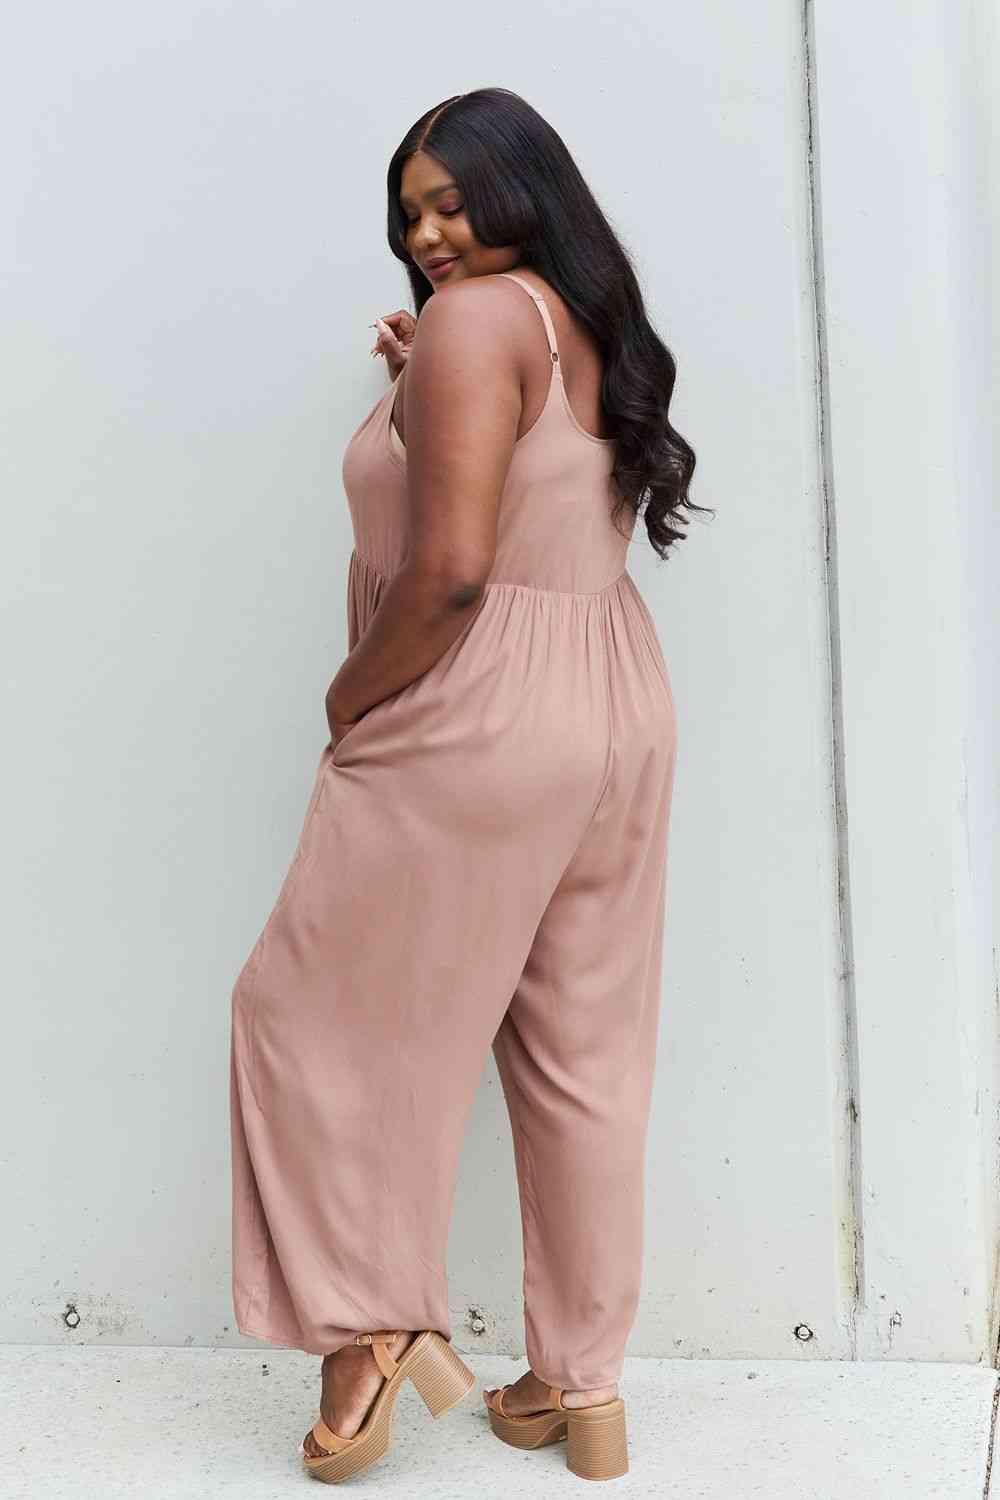 HEYSON All Day Full Size Wide Leg Button Down Jumpsuit in Mocha - Happily Ever Atchison Shop Co.